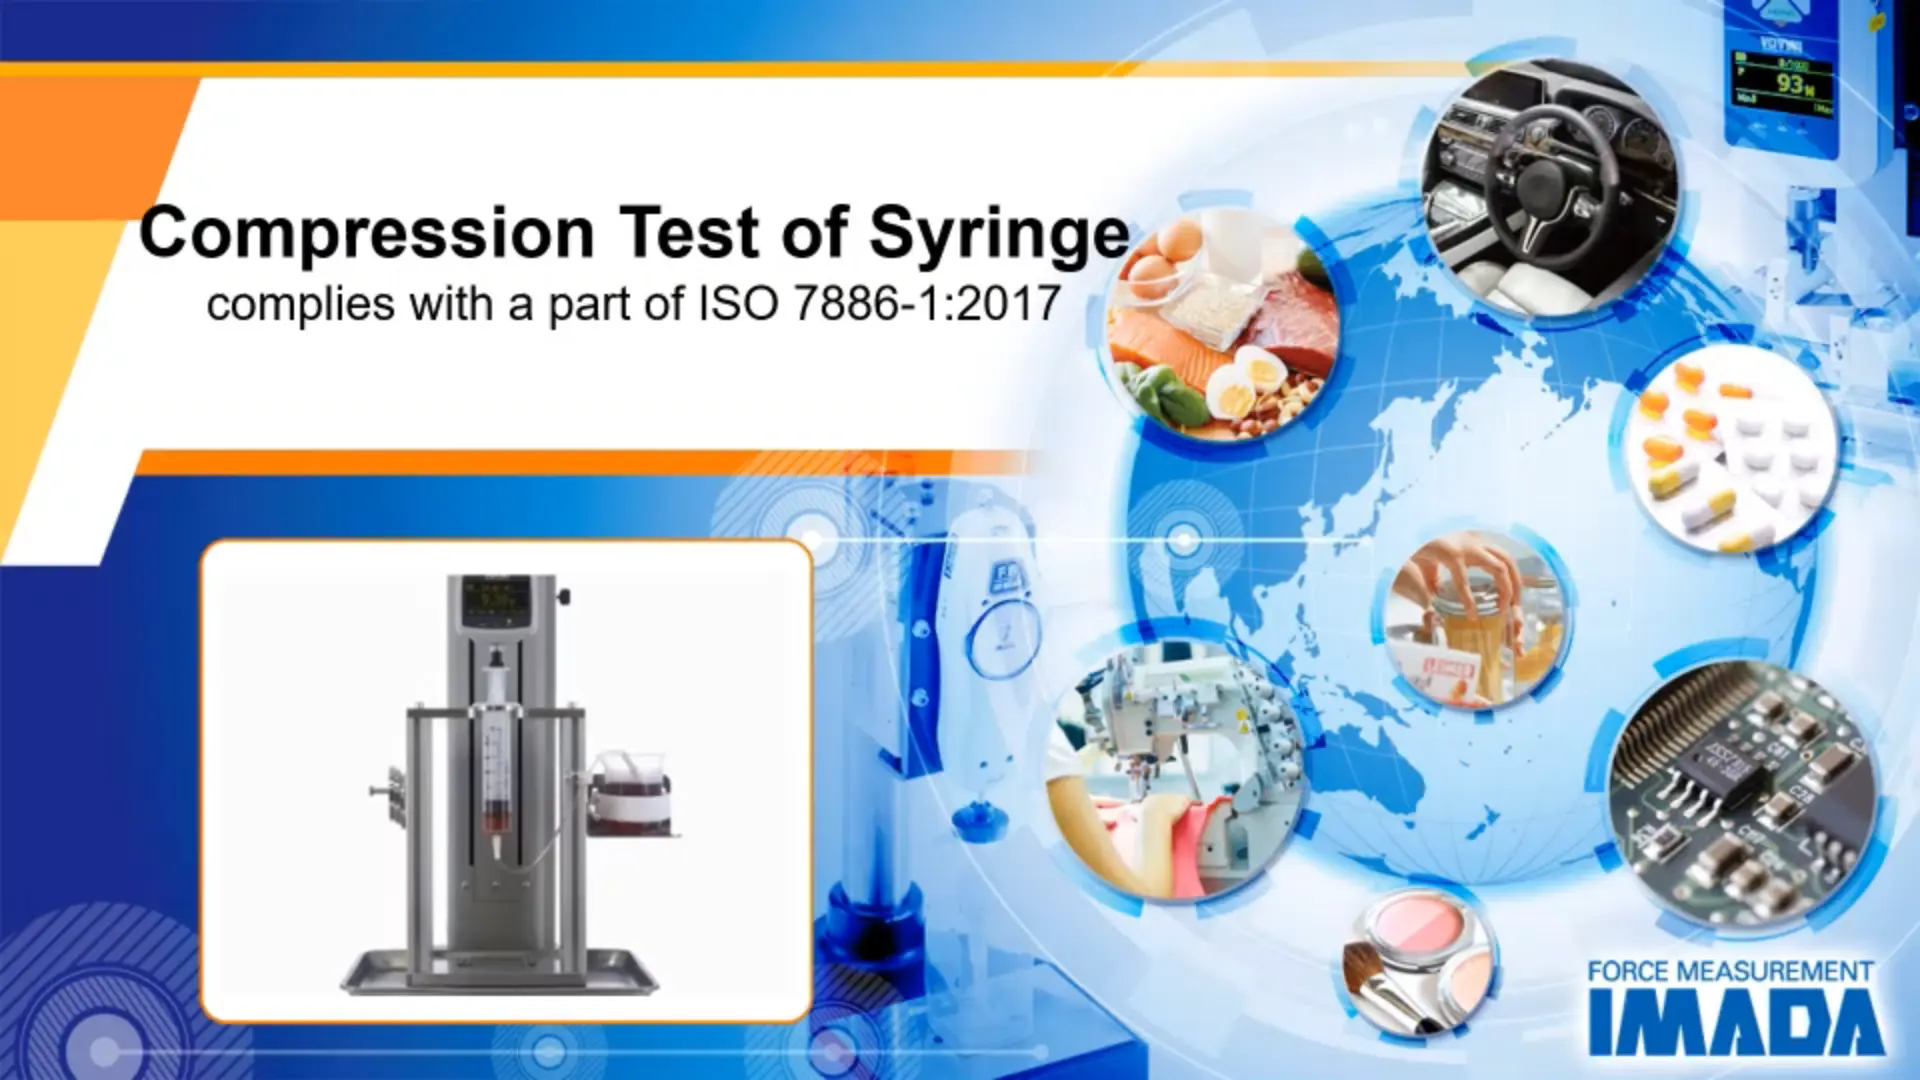 Compression test of syringe (Complies with the corresponding part of ISO 7886-1:2017)